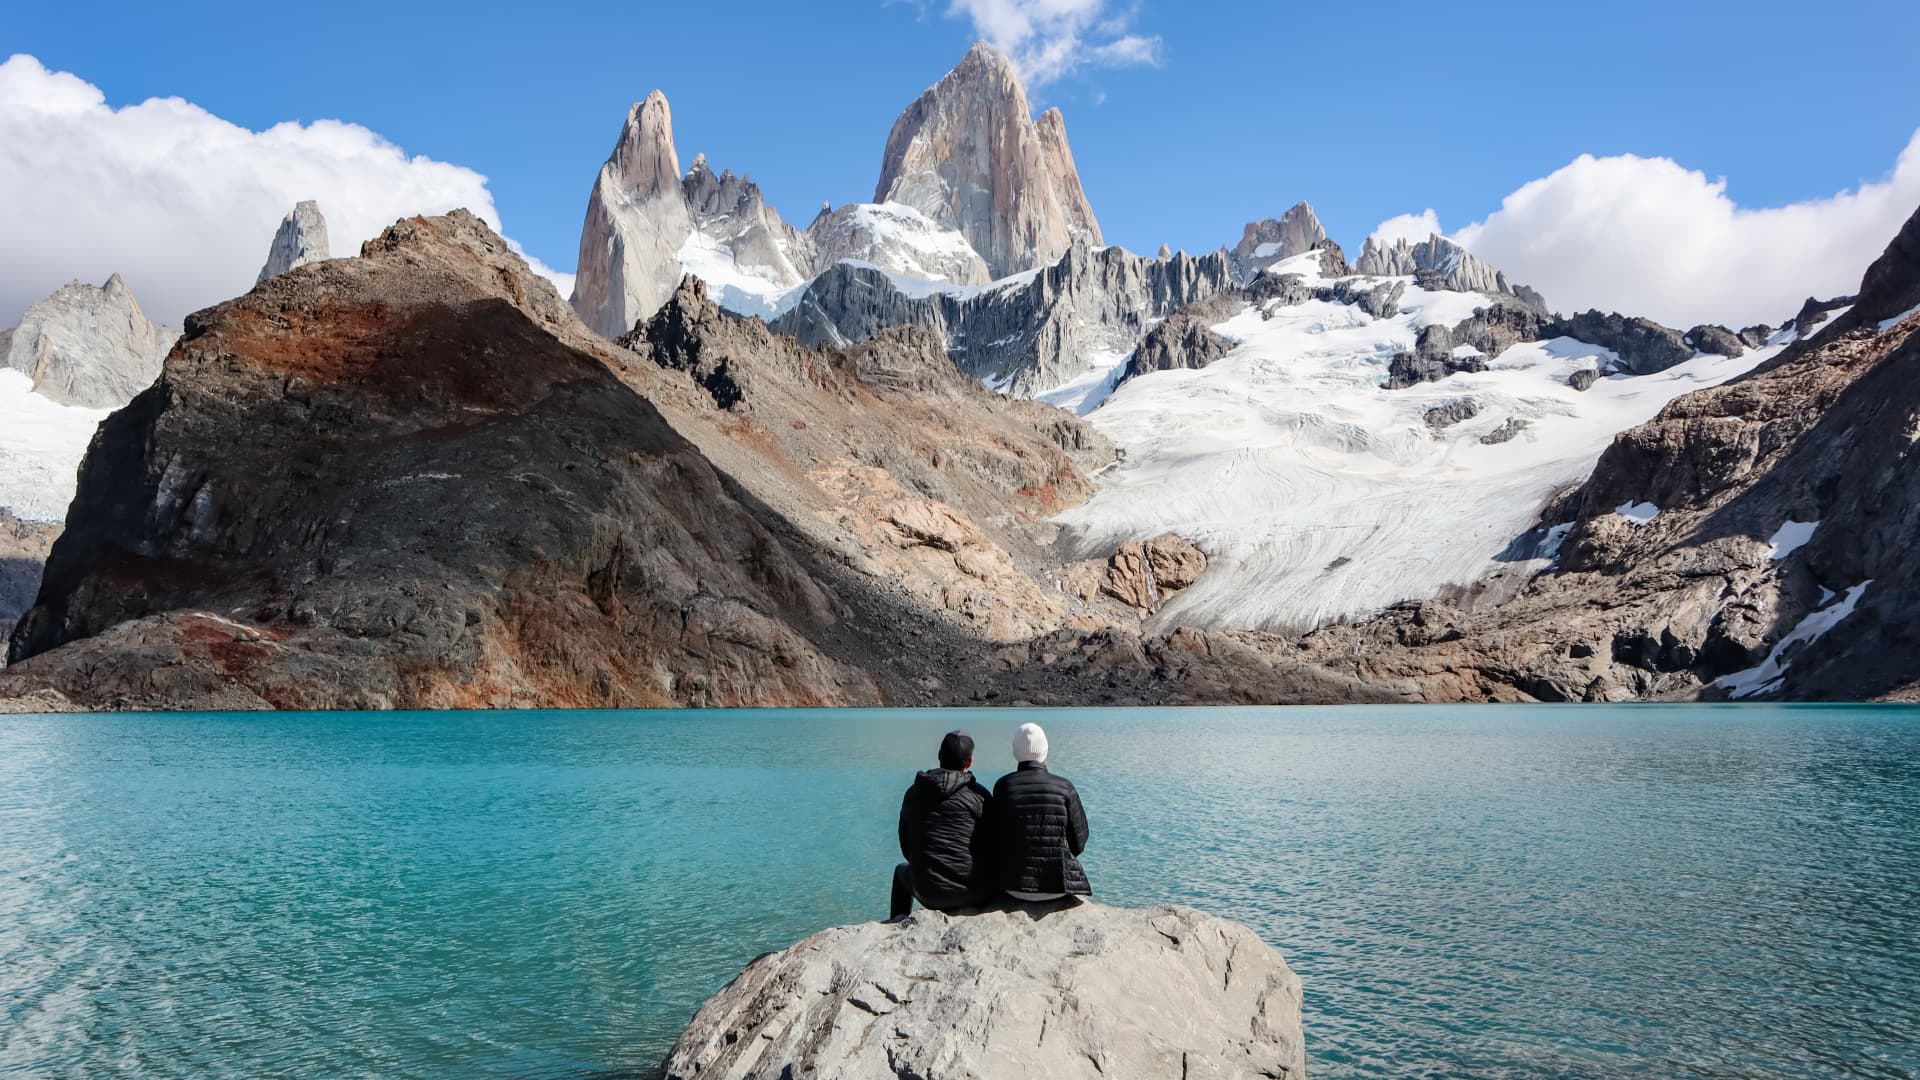 Hudson and Emily Crider on a hike in Patagonia, South America.